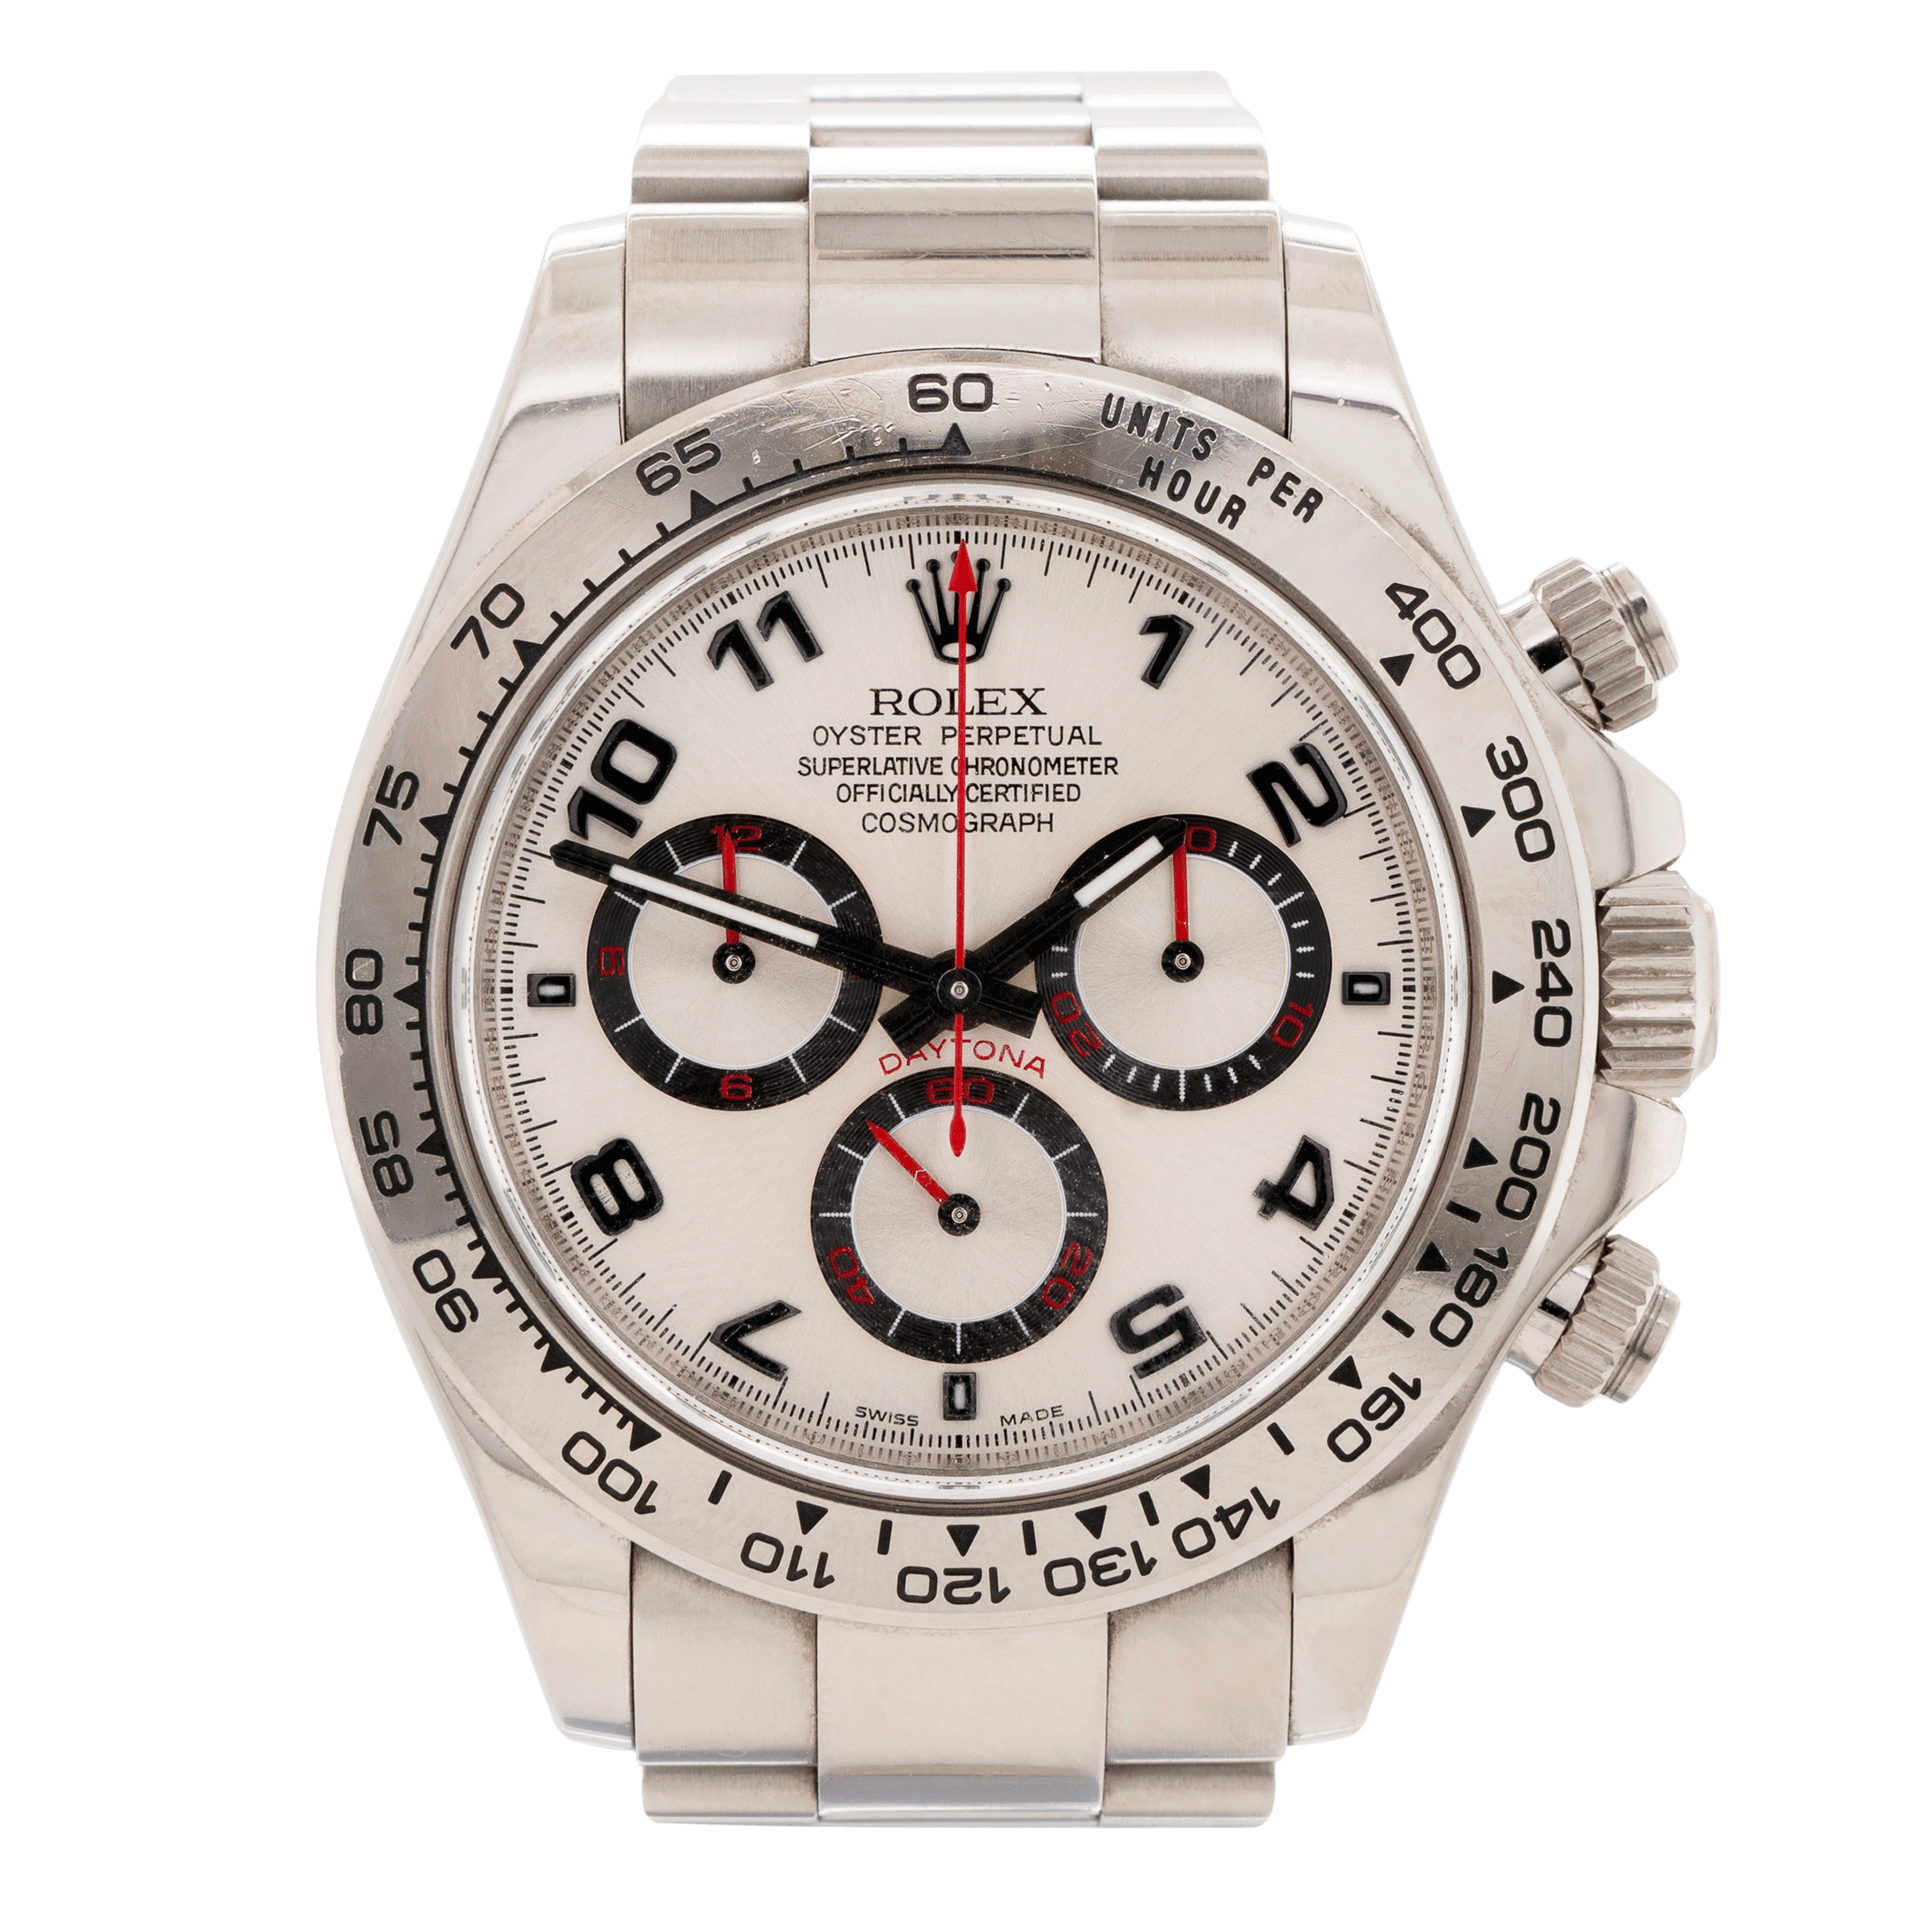 Rolex Daytona Cosmograph White Gold Racing Dial 116509-7.png